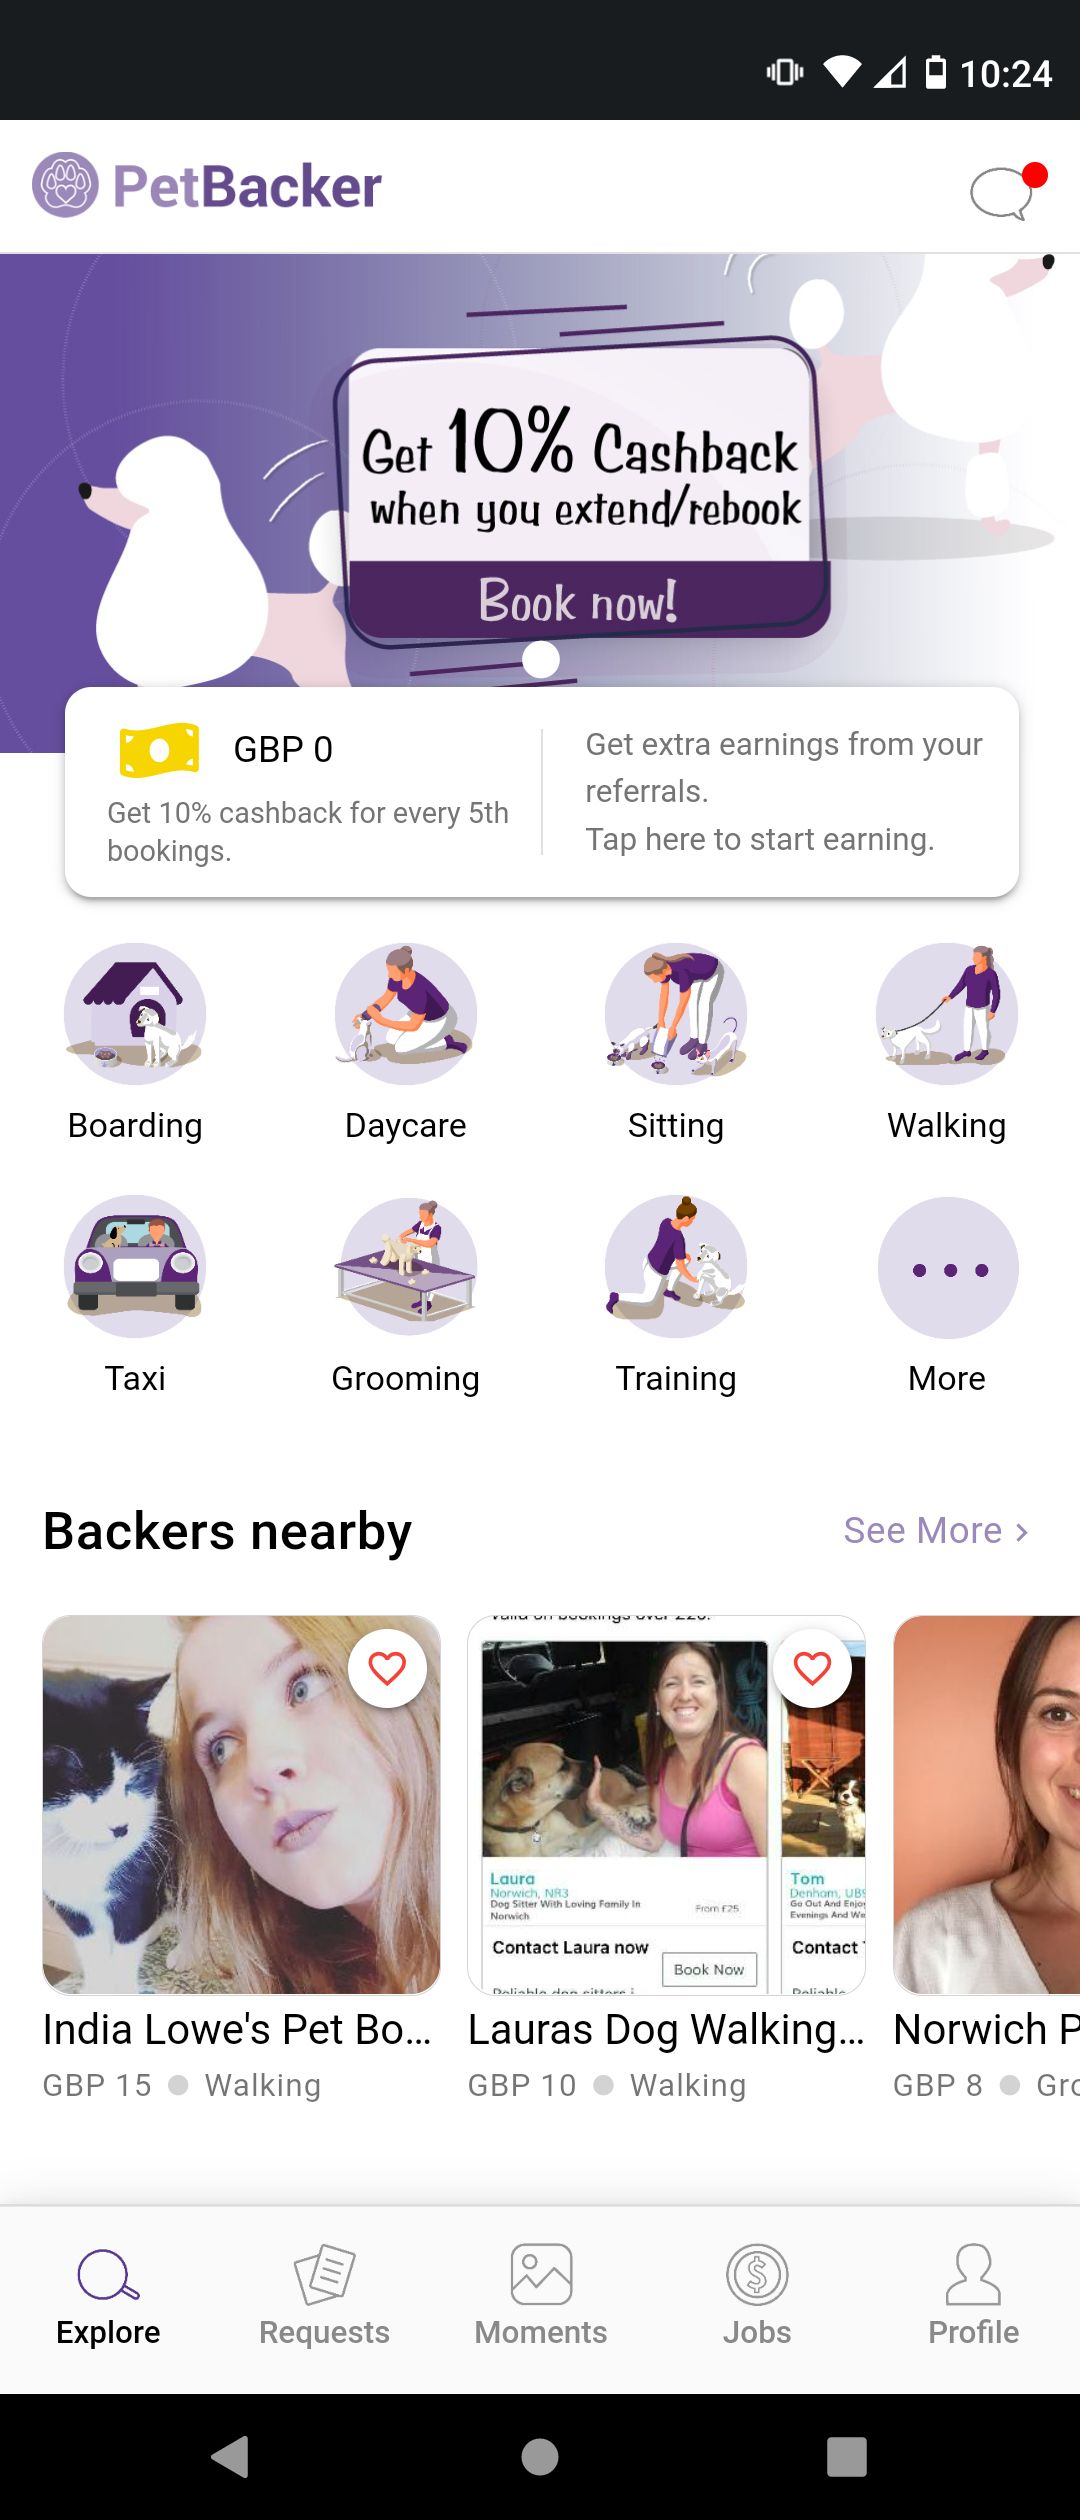 Features to Explore on the PetBacker App